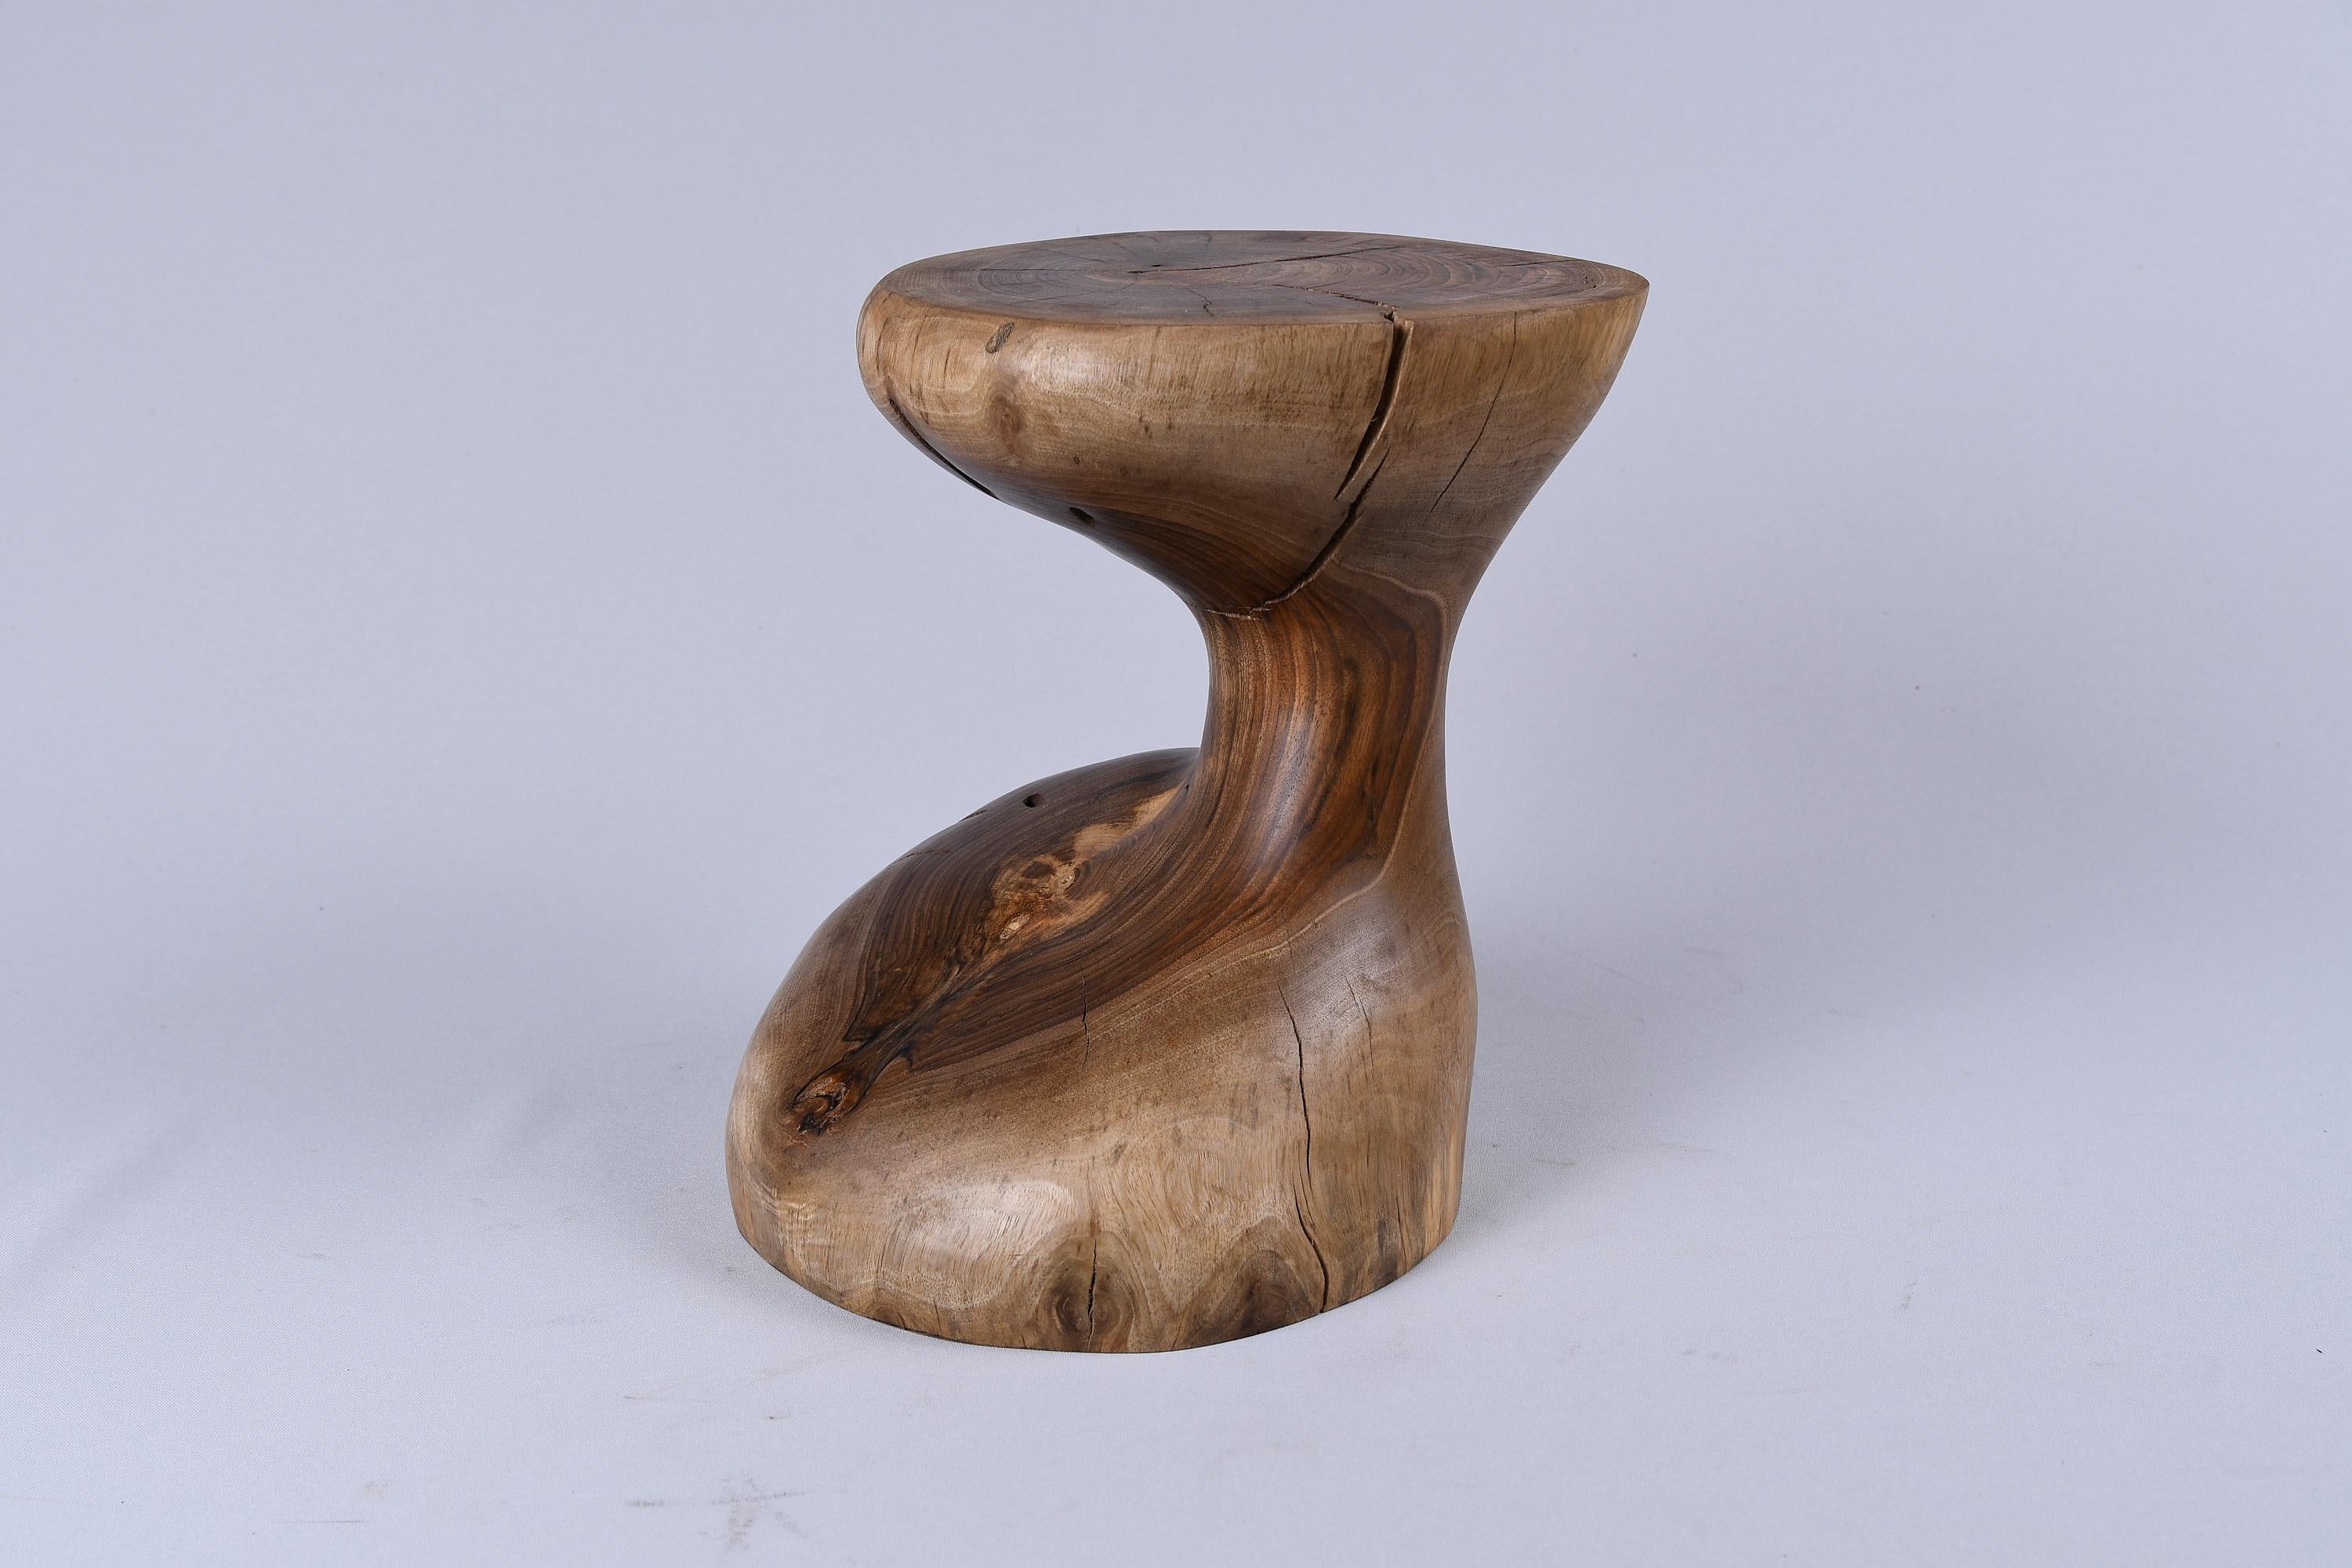 Unique chainsaw carved wooden functional sculpture usable as a multifunctional piece such as a stool, side table, pedestal, night table or many more. Carved from a single piece of wood and protected with the highest quality oils, ensuring durability